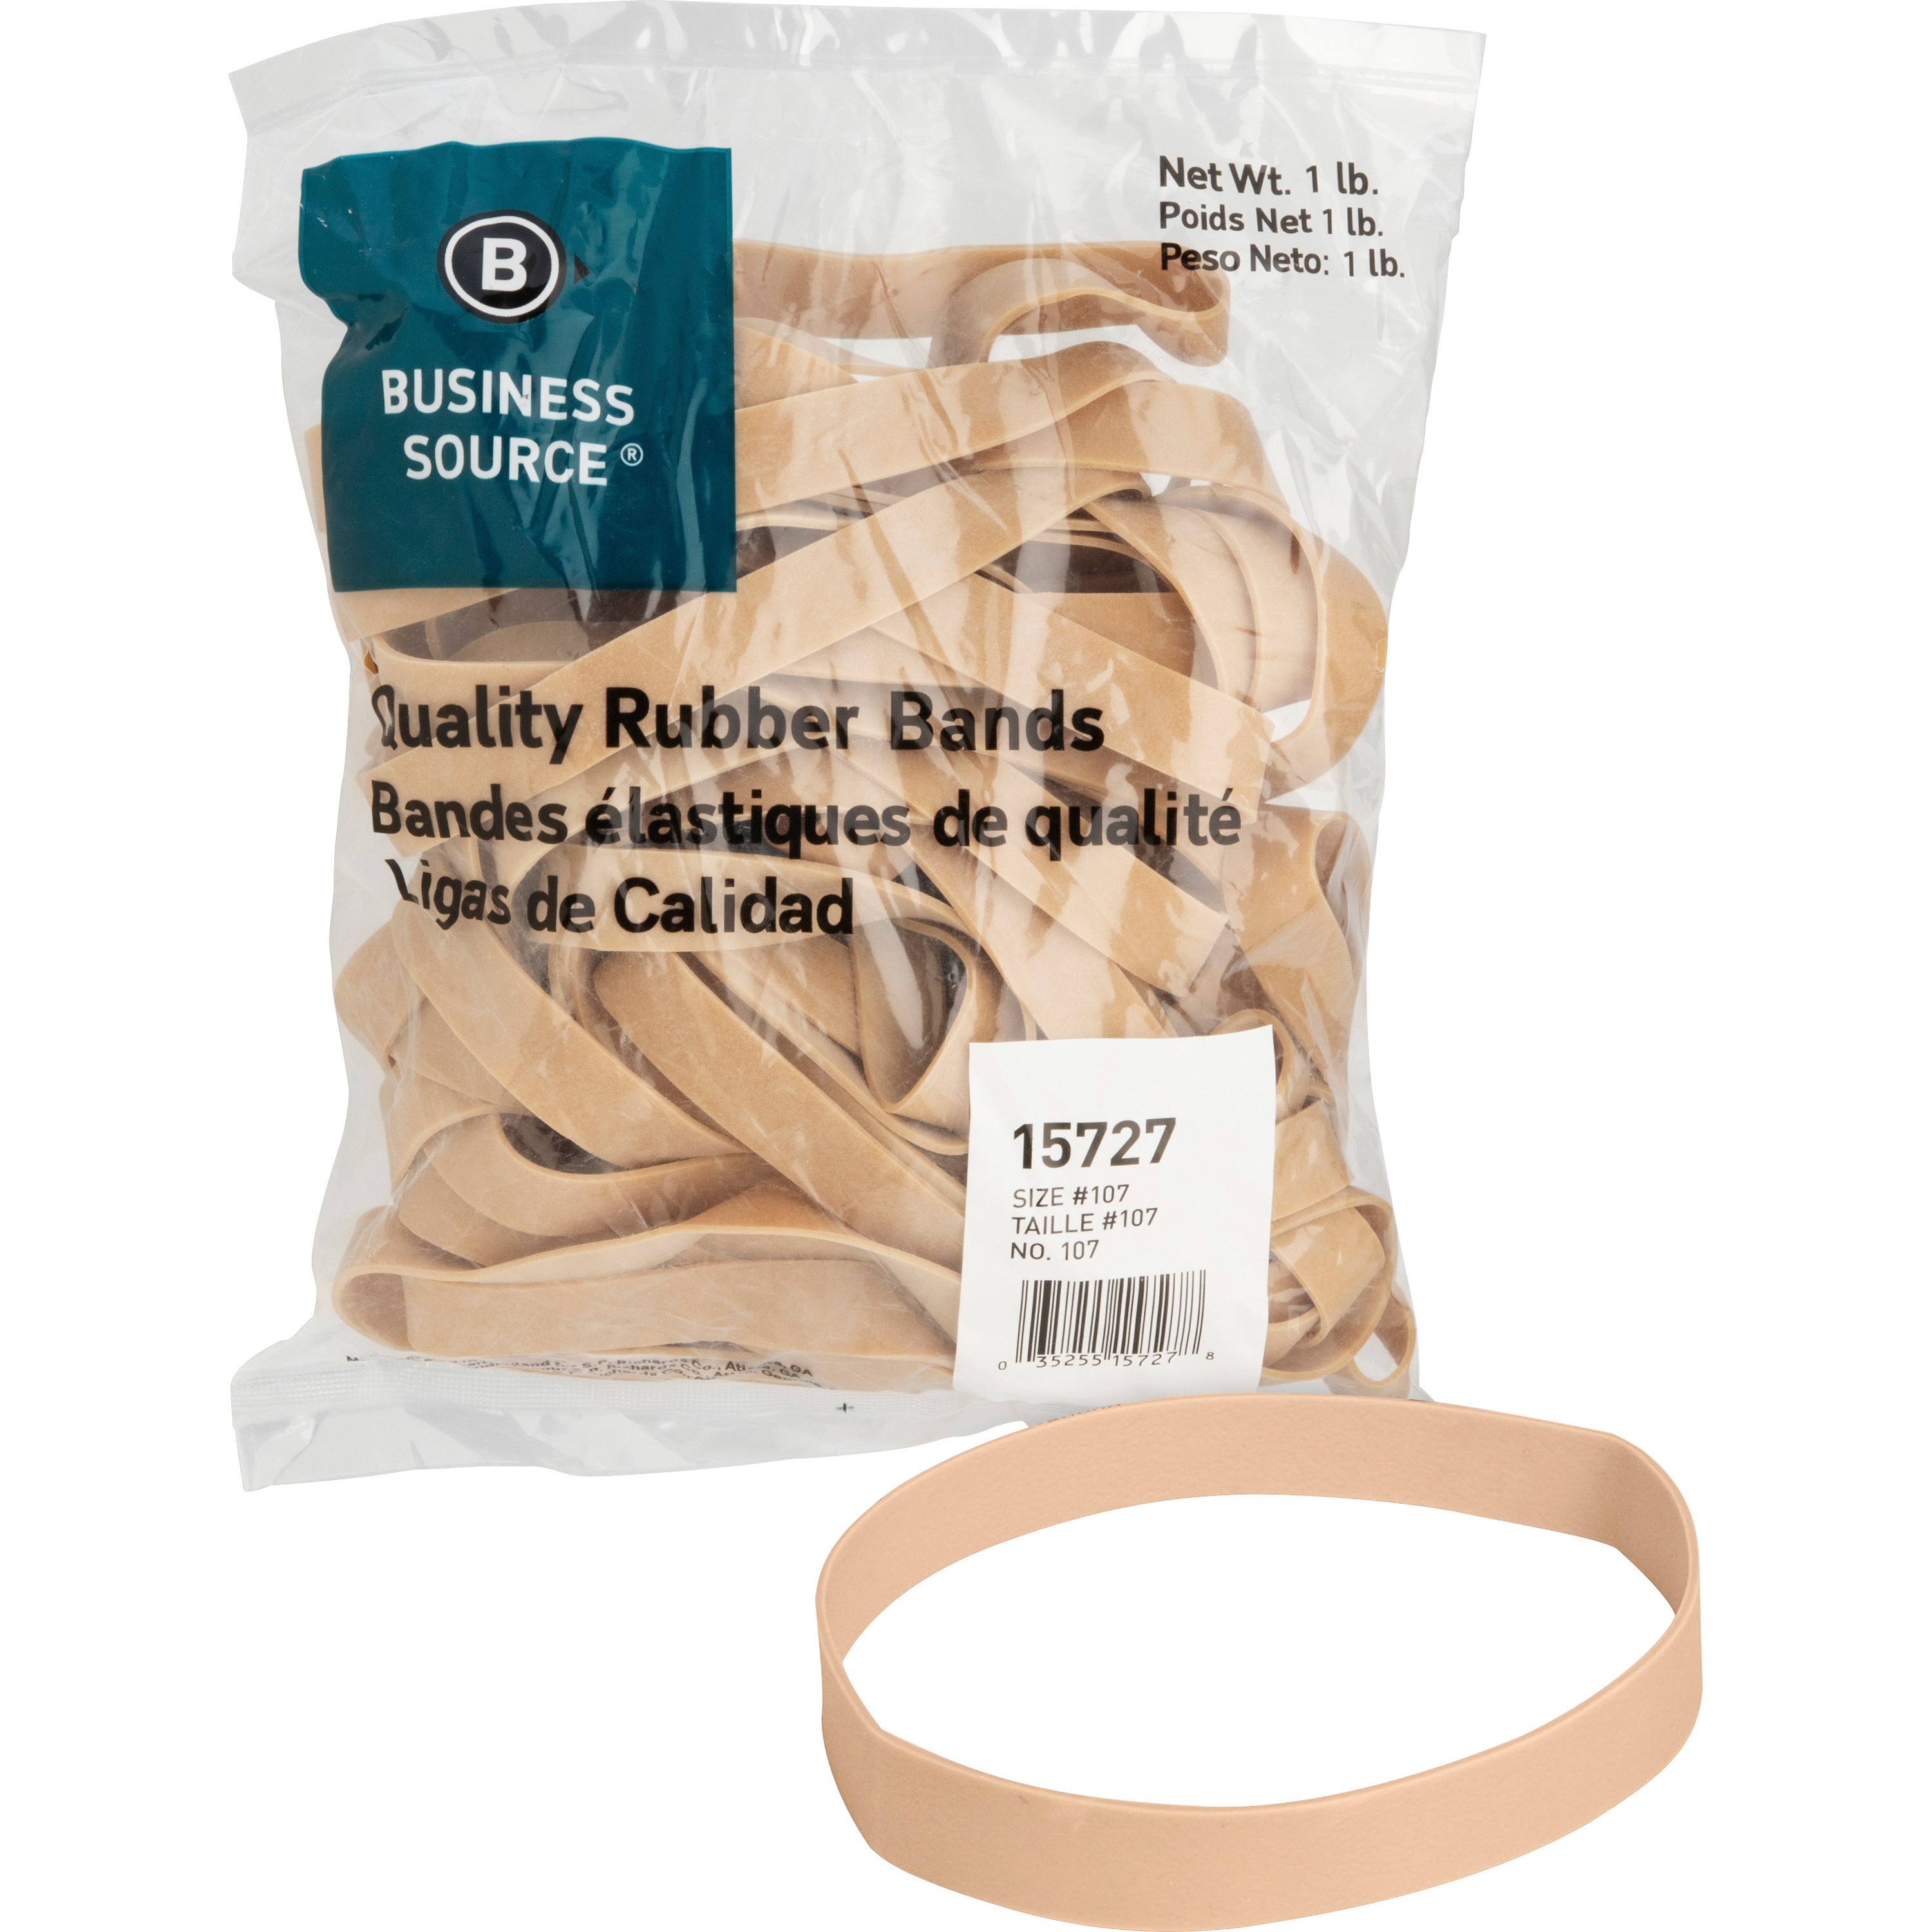 Dixon Star Radial Rubber Band Size 107 0 25lb In 1 Box Rubber.